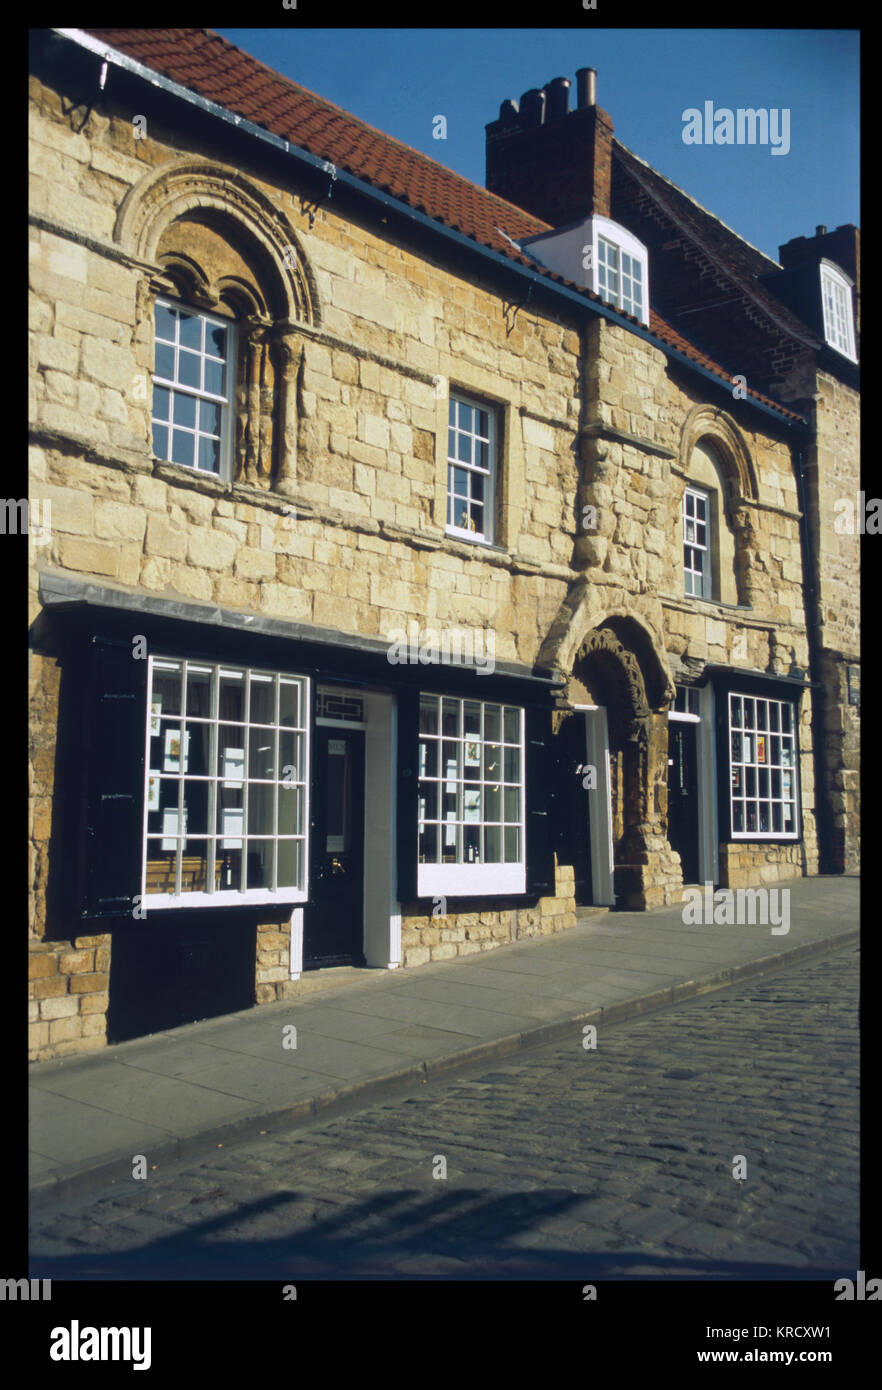 The 12th century Jews House  Lincoln, England, is a fine surviving example of Norman architecture.       Date: 2004 Stock Photo